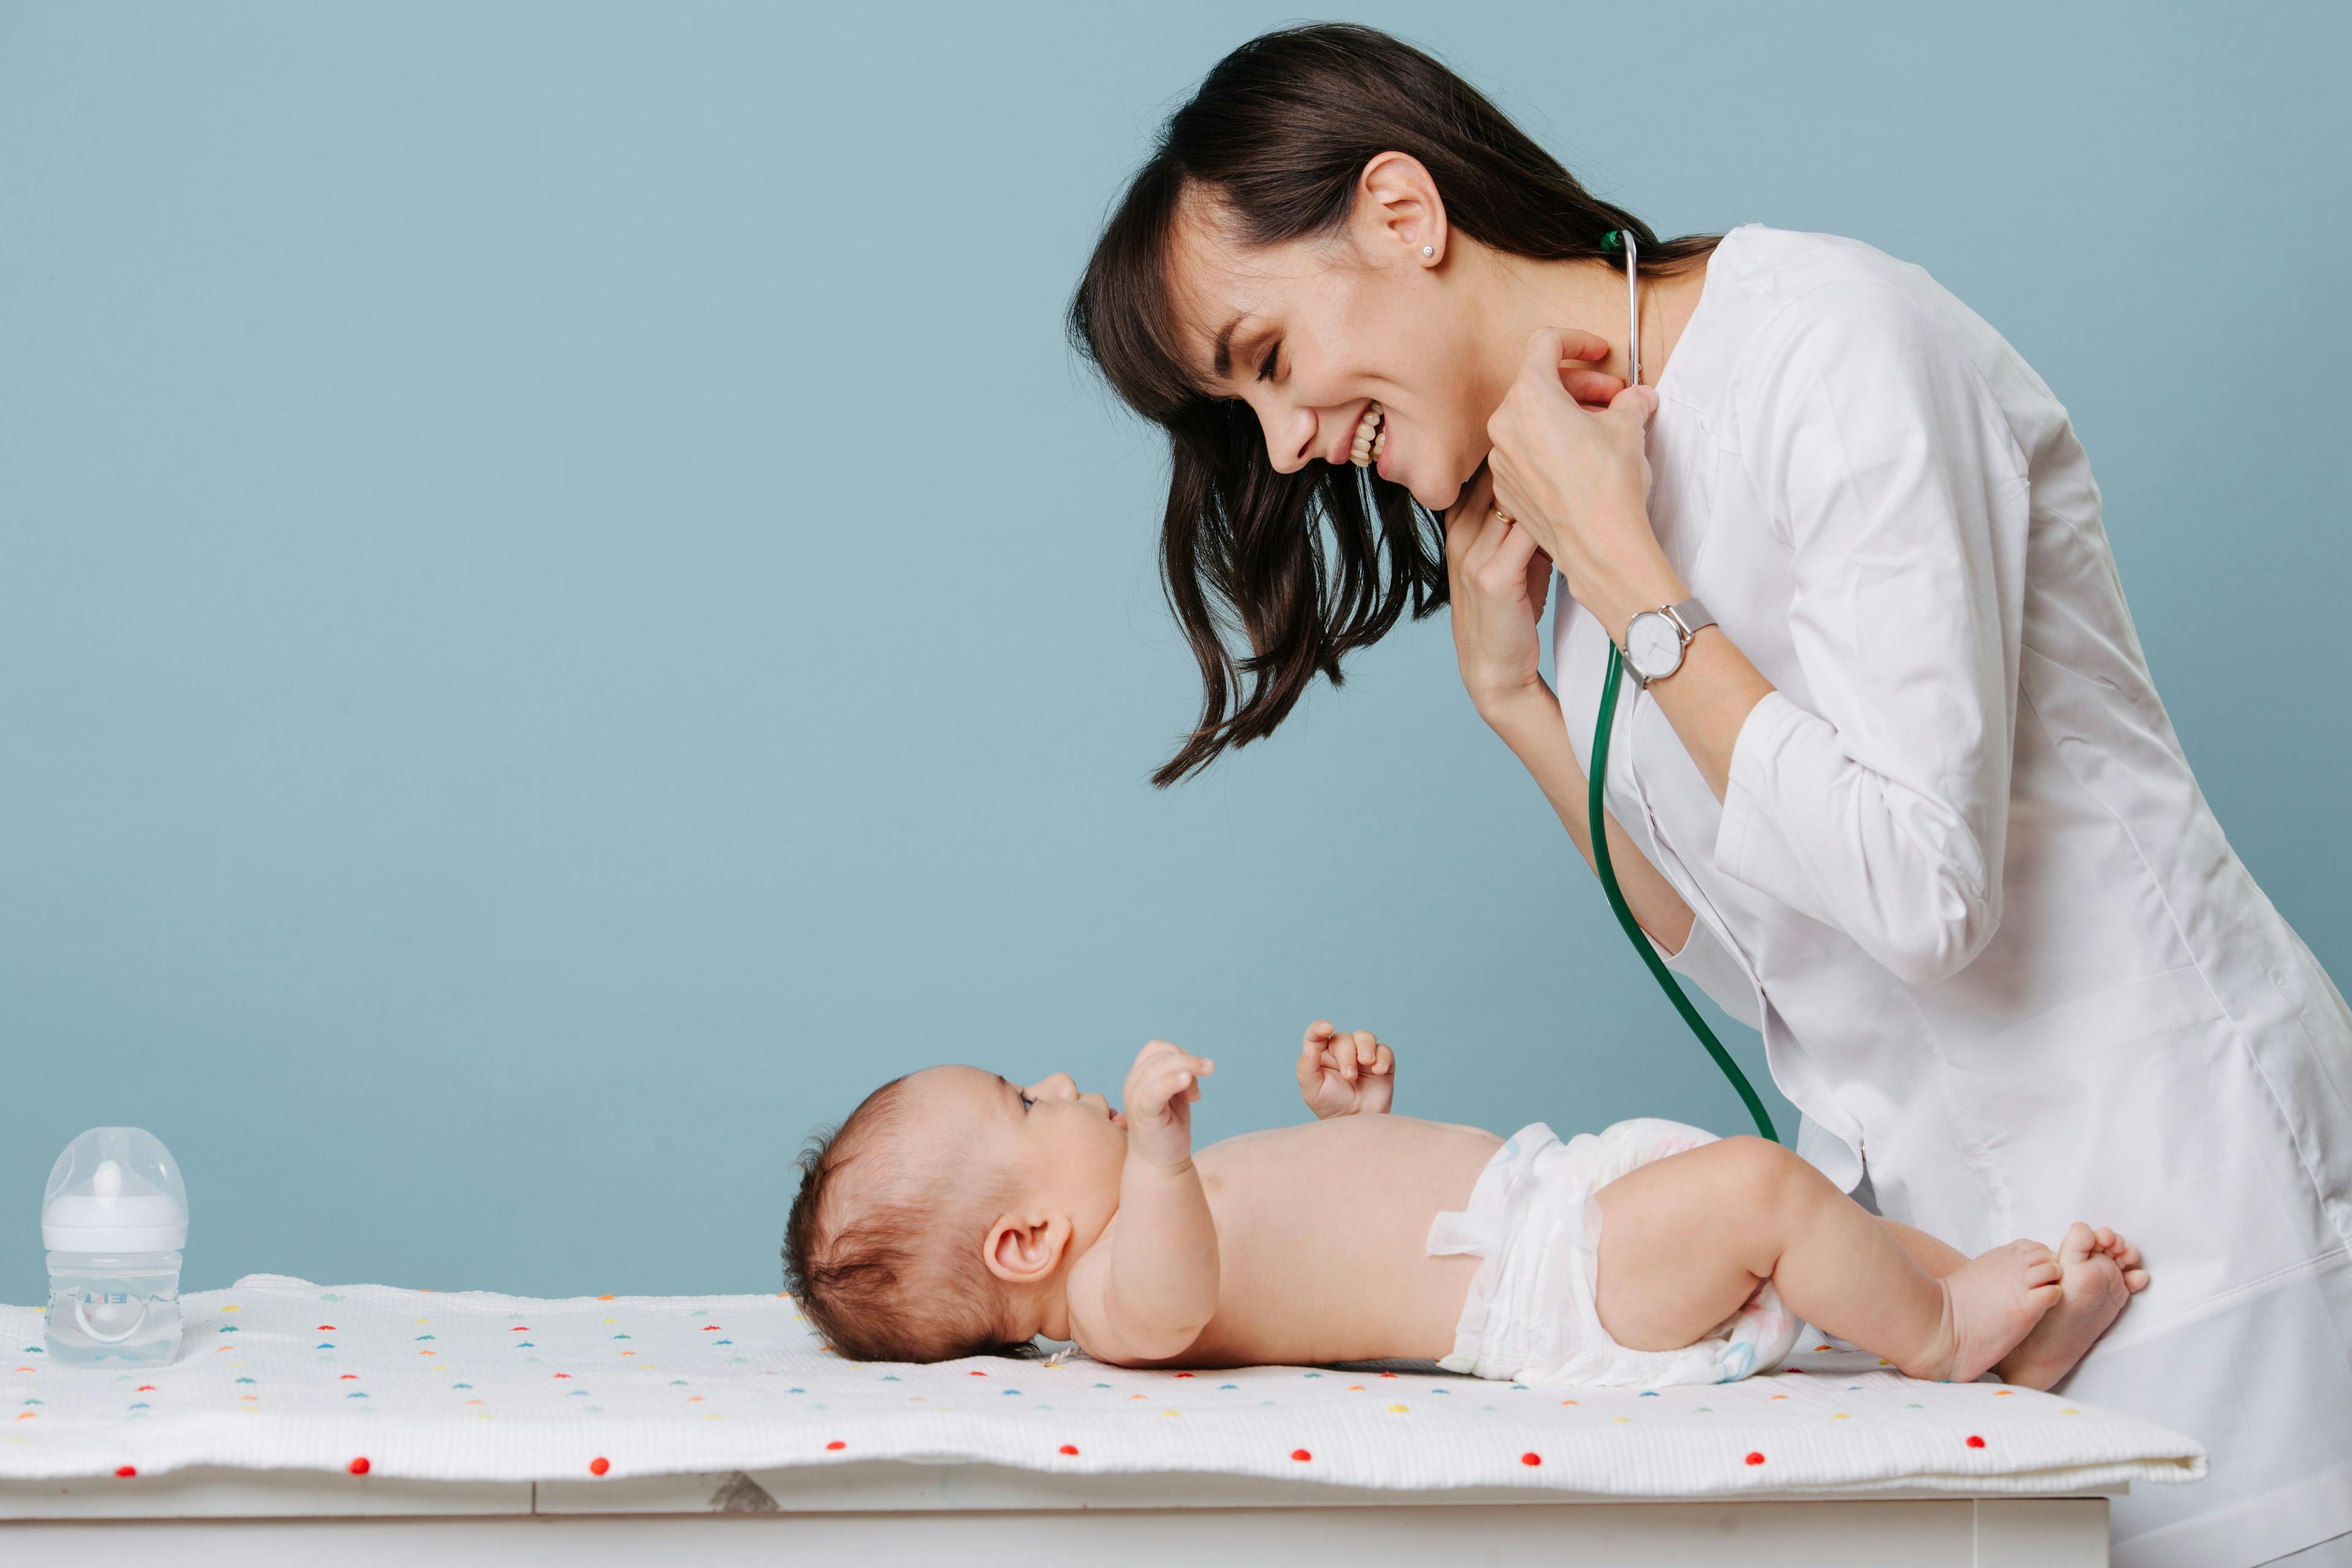 Less invasive surfactant administration reduces adverse outcomes in infants 